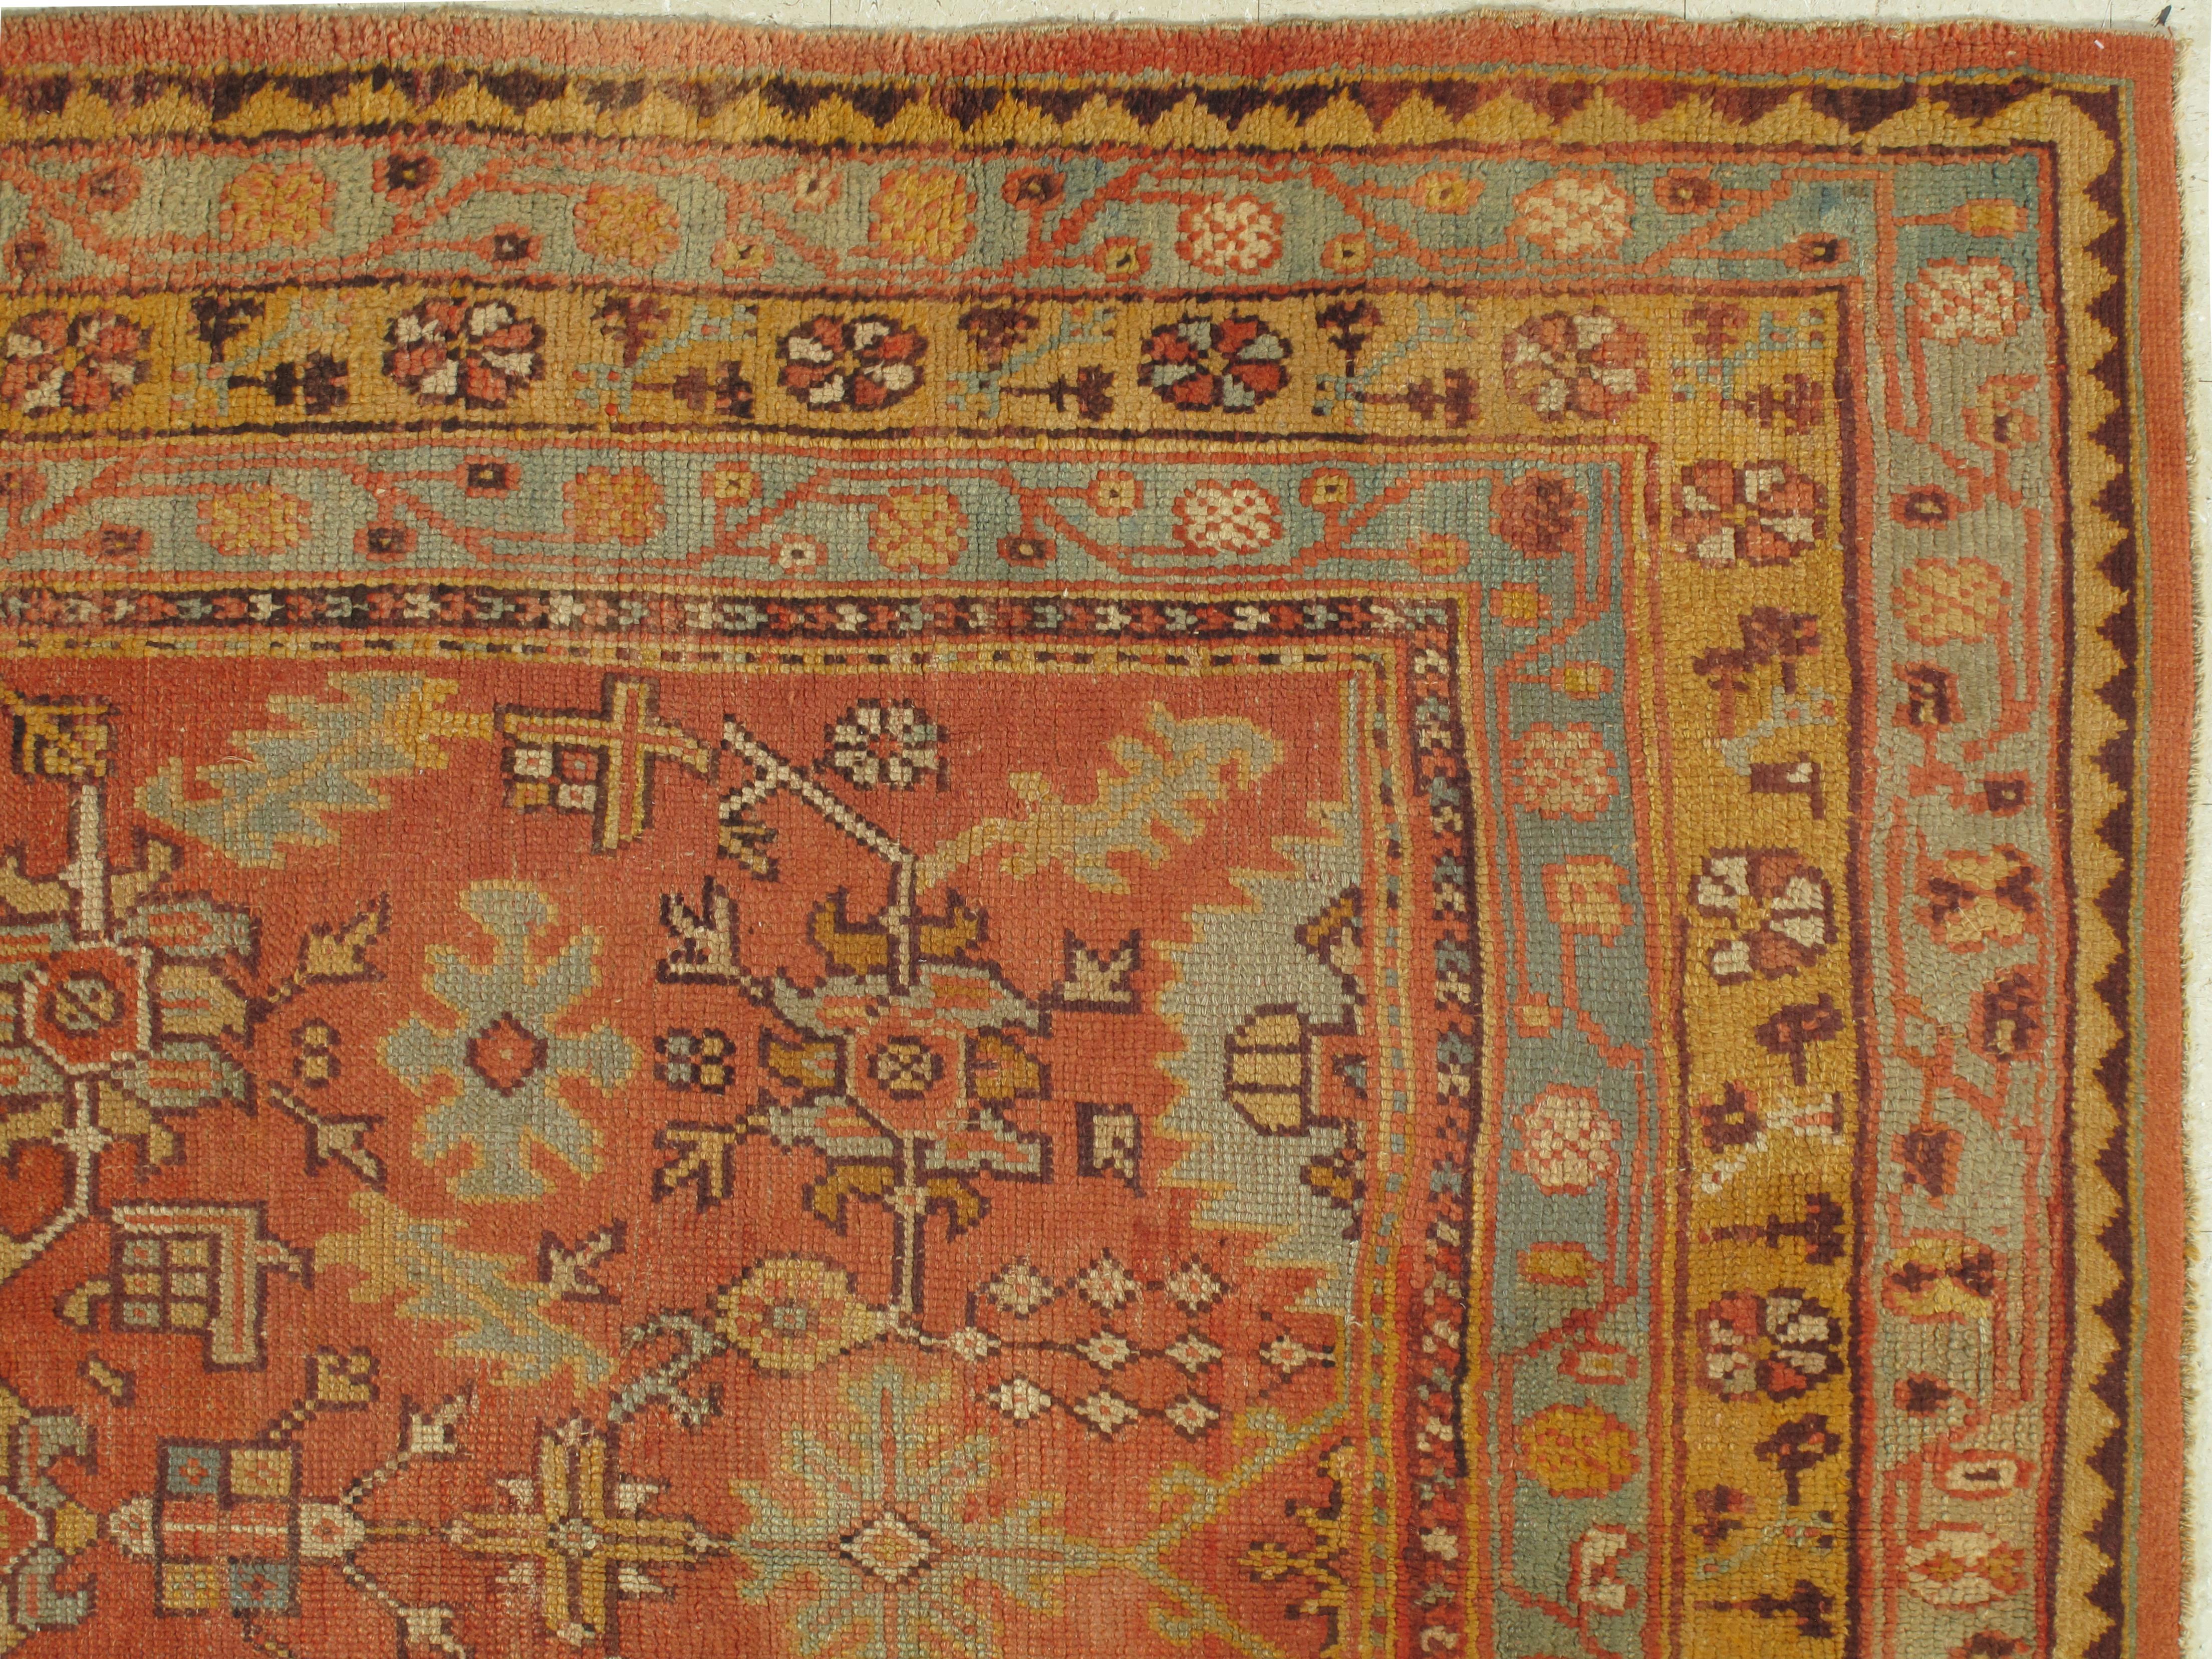 Turkish carpet from Oushak with a combination of soft colors having an all-over design. Finely woven, having the most superb wool found in the mountains of Anatolia. This is a fine example of an antique Oushak. Size: 7'3